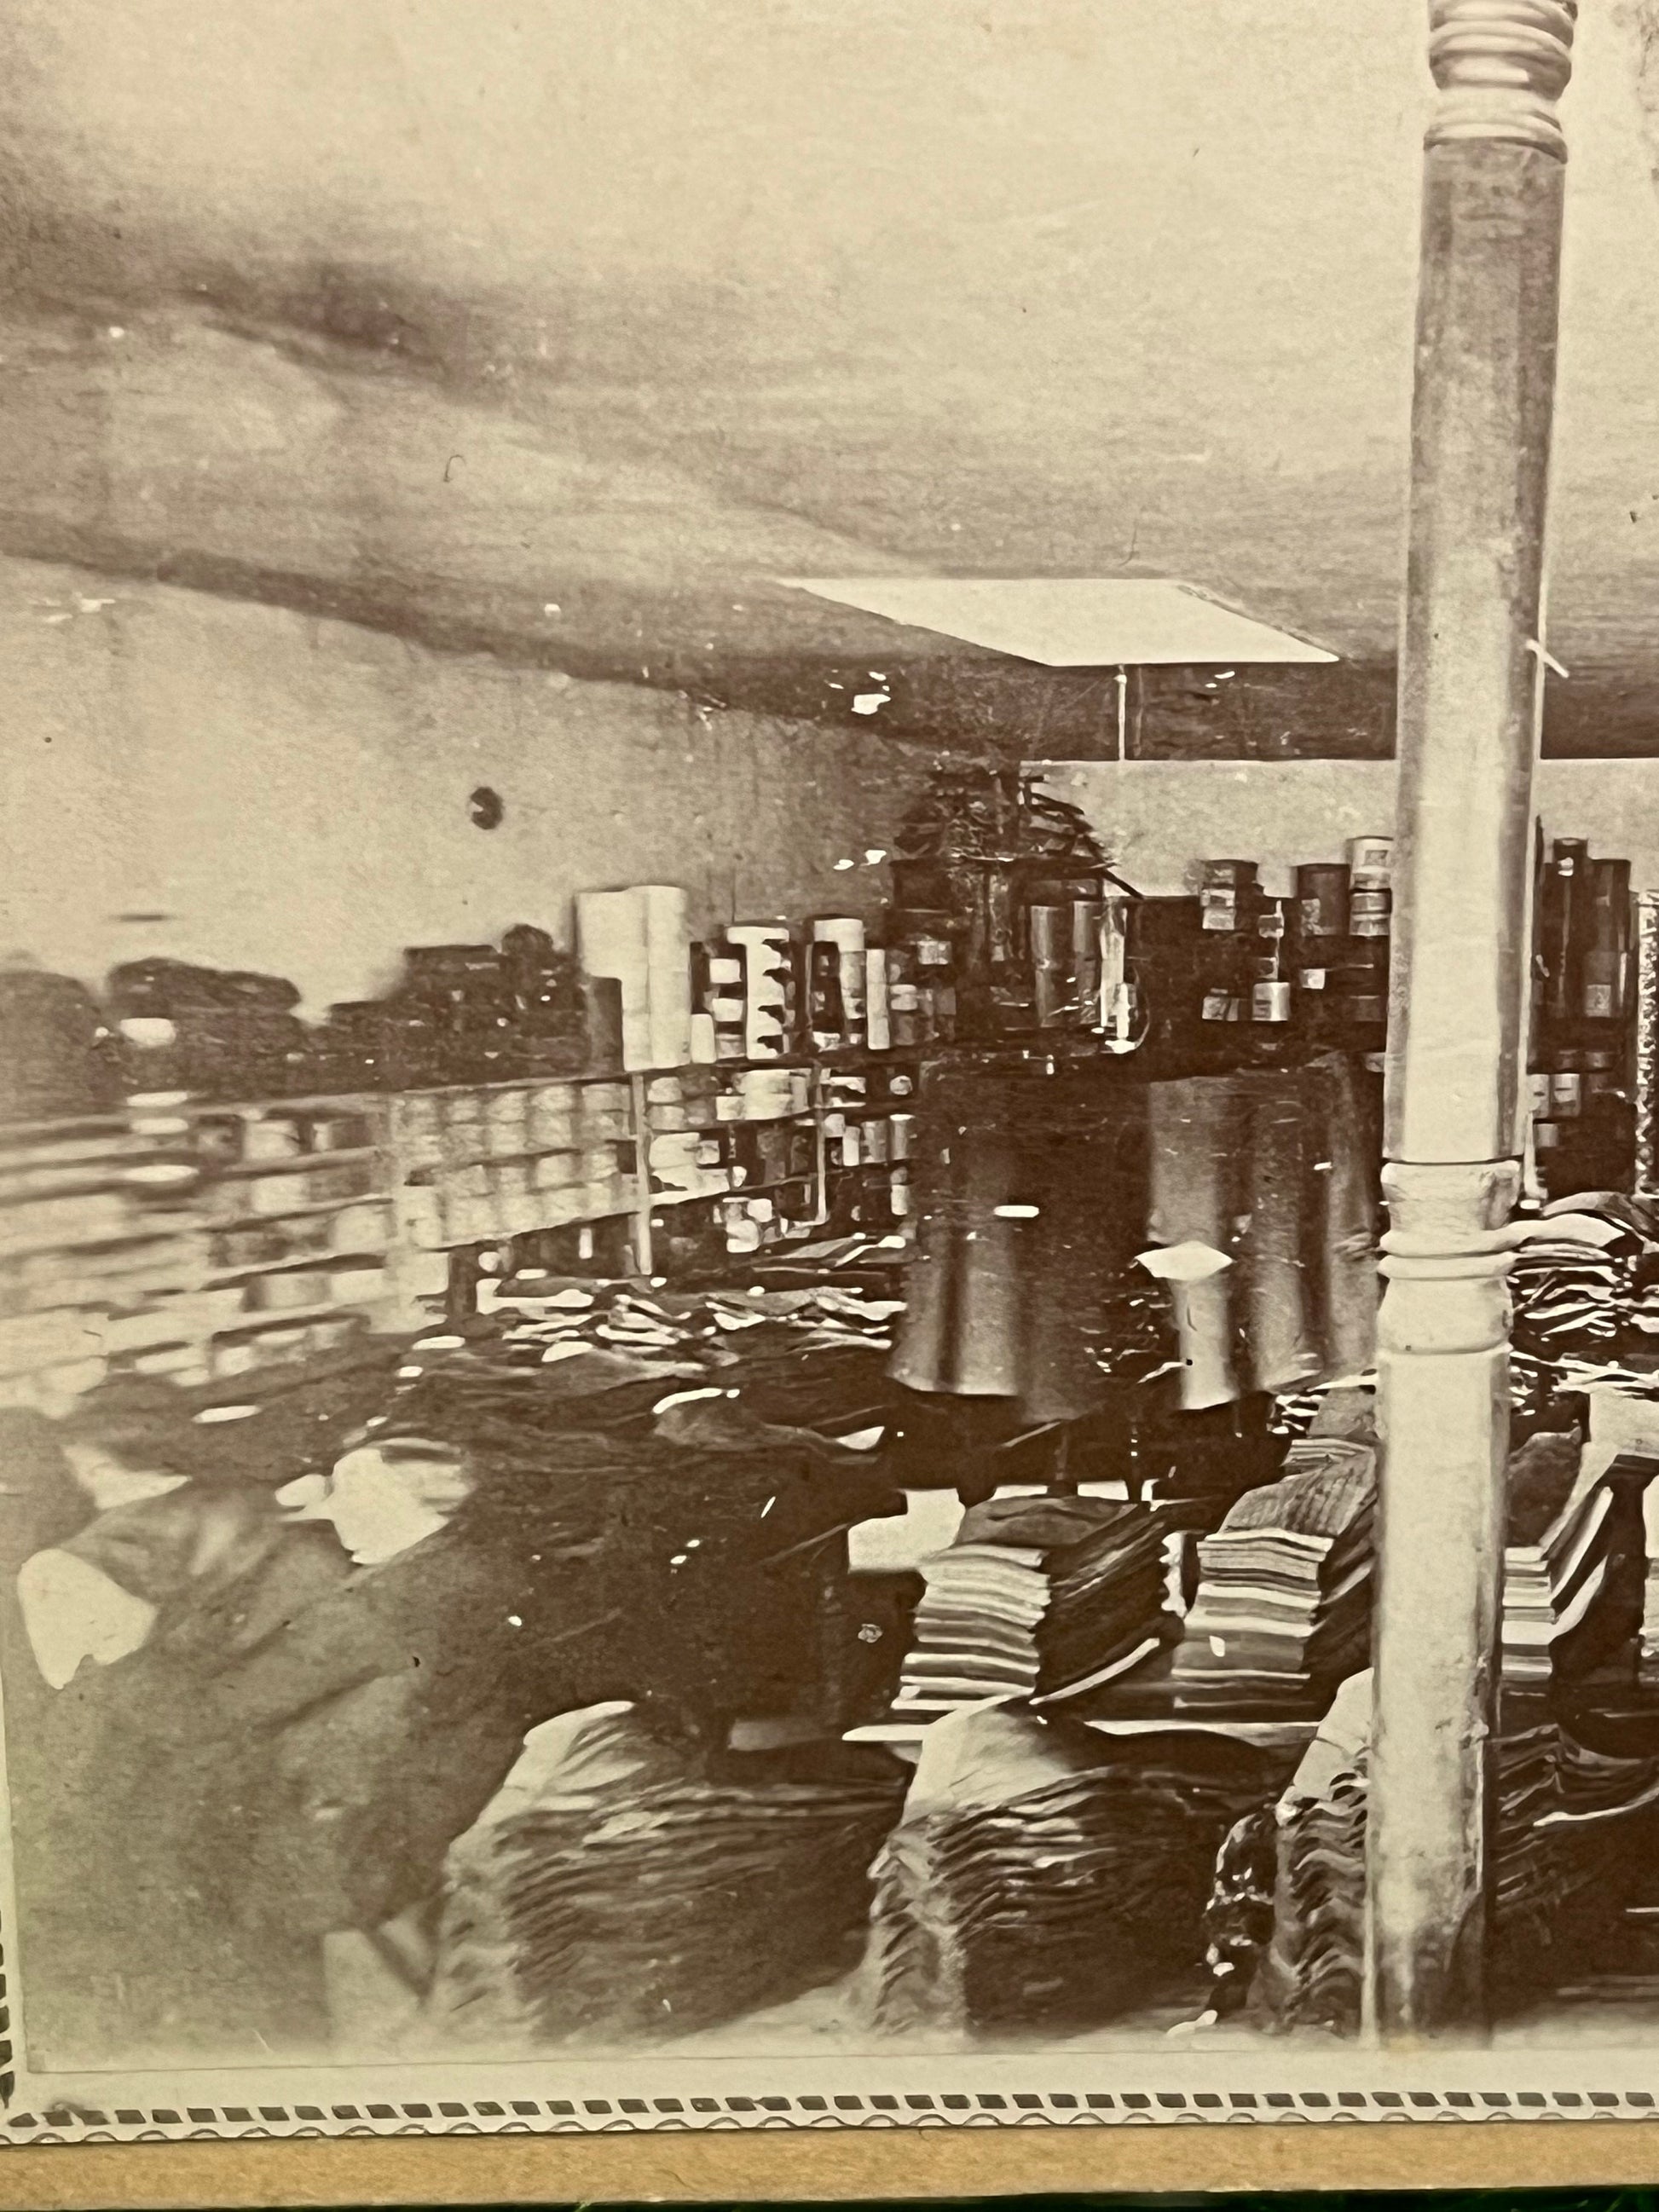 Antique occupational photo store interior Augusta Kansas 1890-1900 clothing department general store